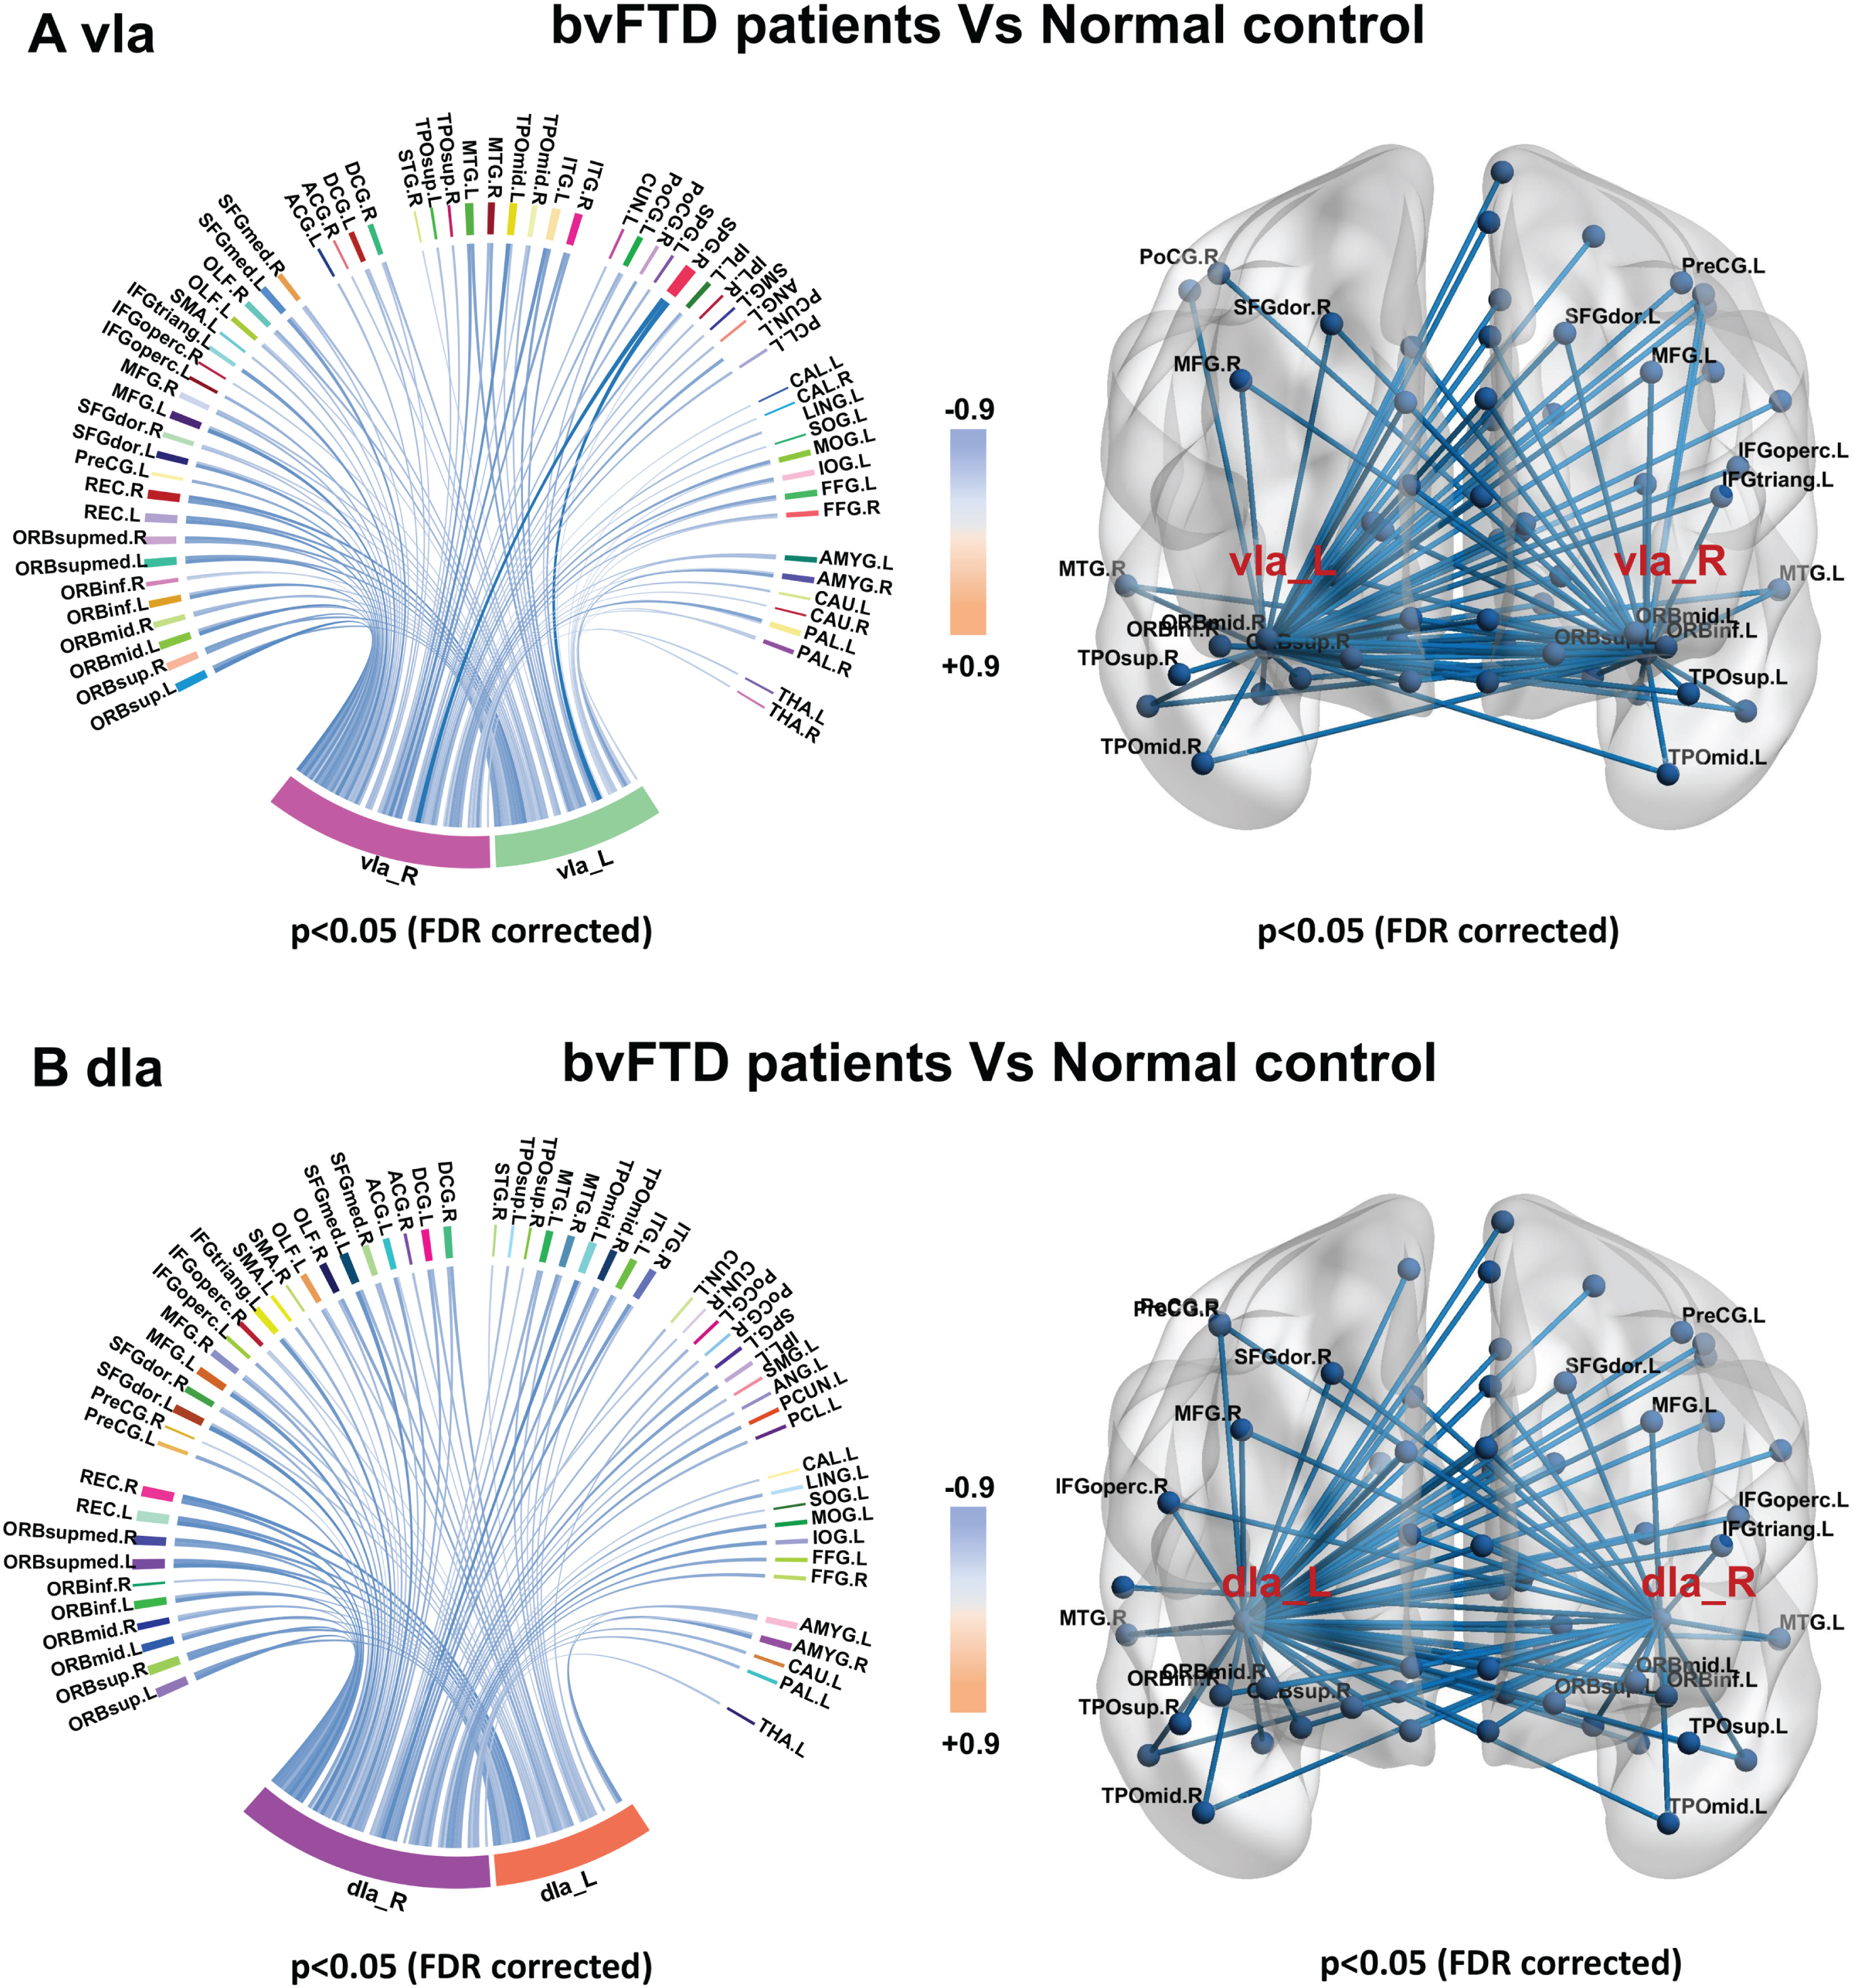 Sub-insula metabolic network in bvFTD and control groups. Compared with controls, bvFTD patients showed decreased metabolic connectivity between bilateral vIa (A) and dIa subregions (B) and frontal, temporal, parietal, and occipital poles; basal ganglia; and thalamus.